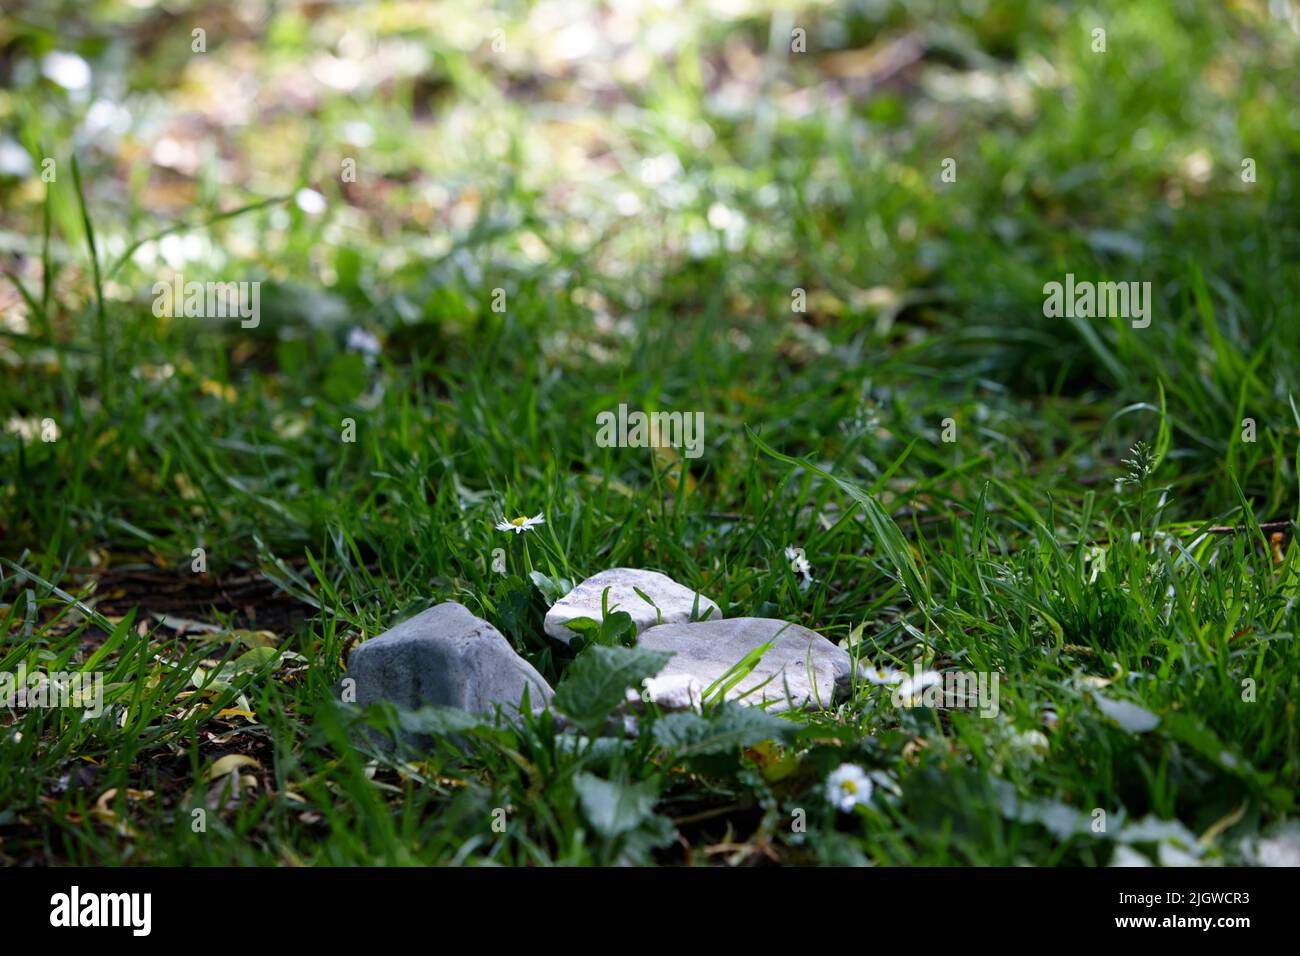 group of stones light by sunlight lying in grass Stock Photo